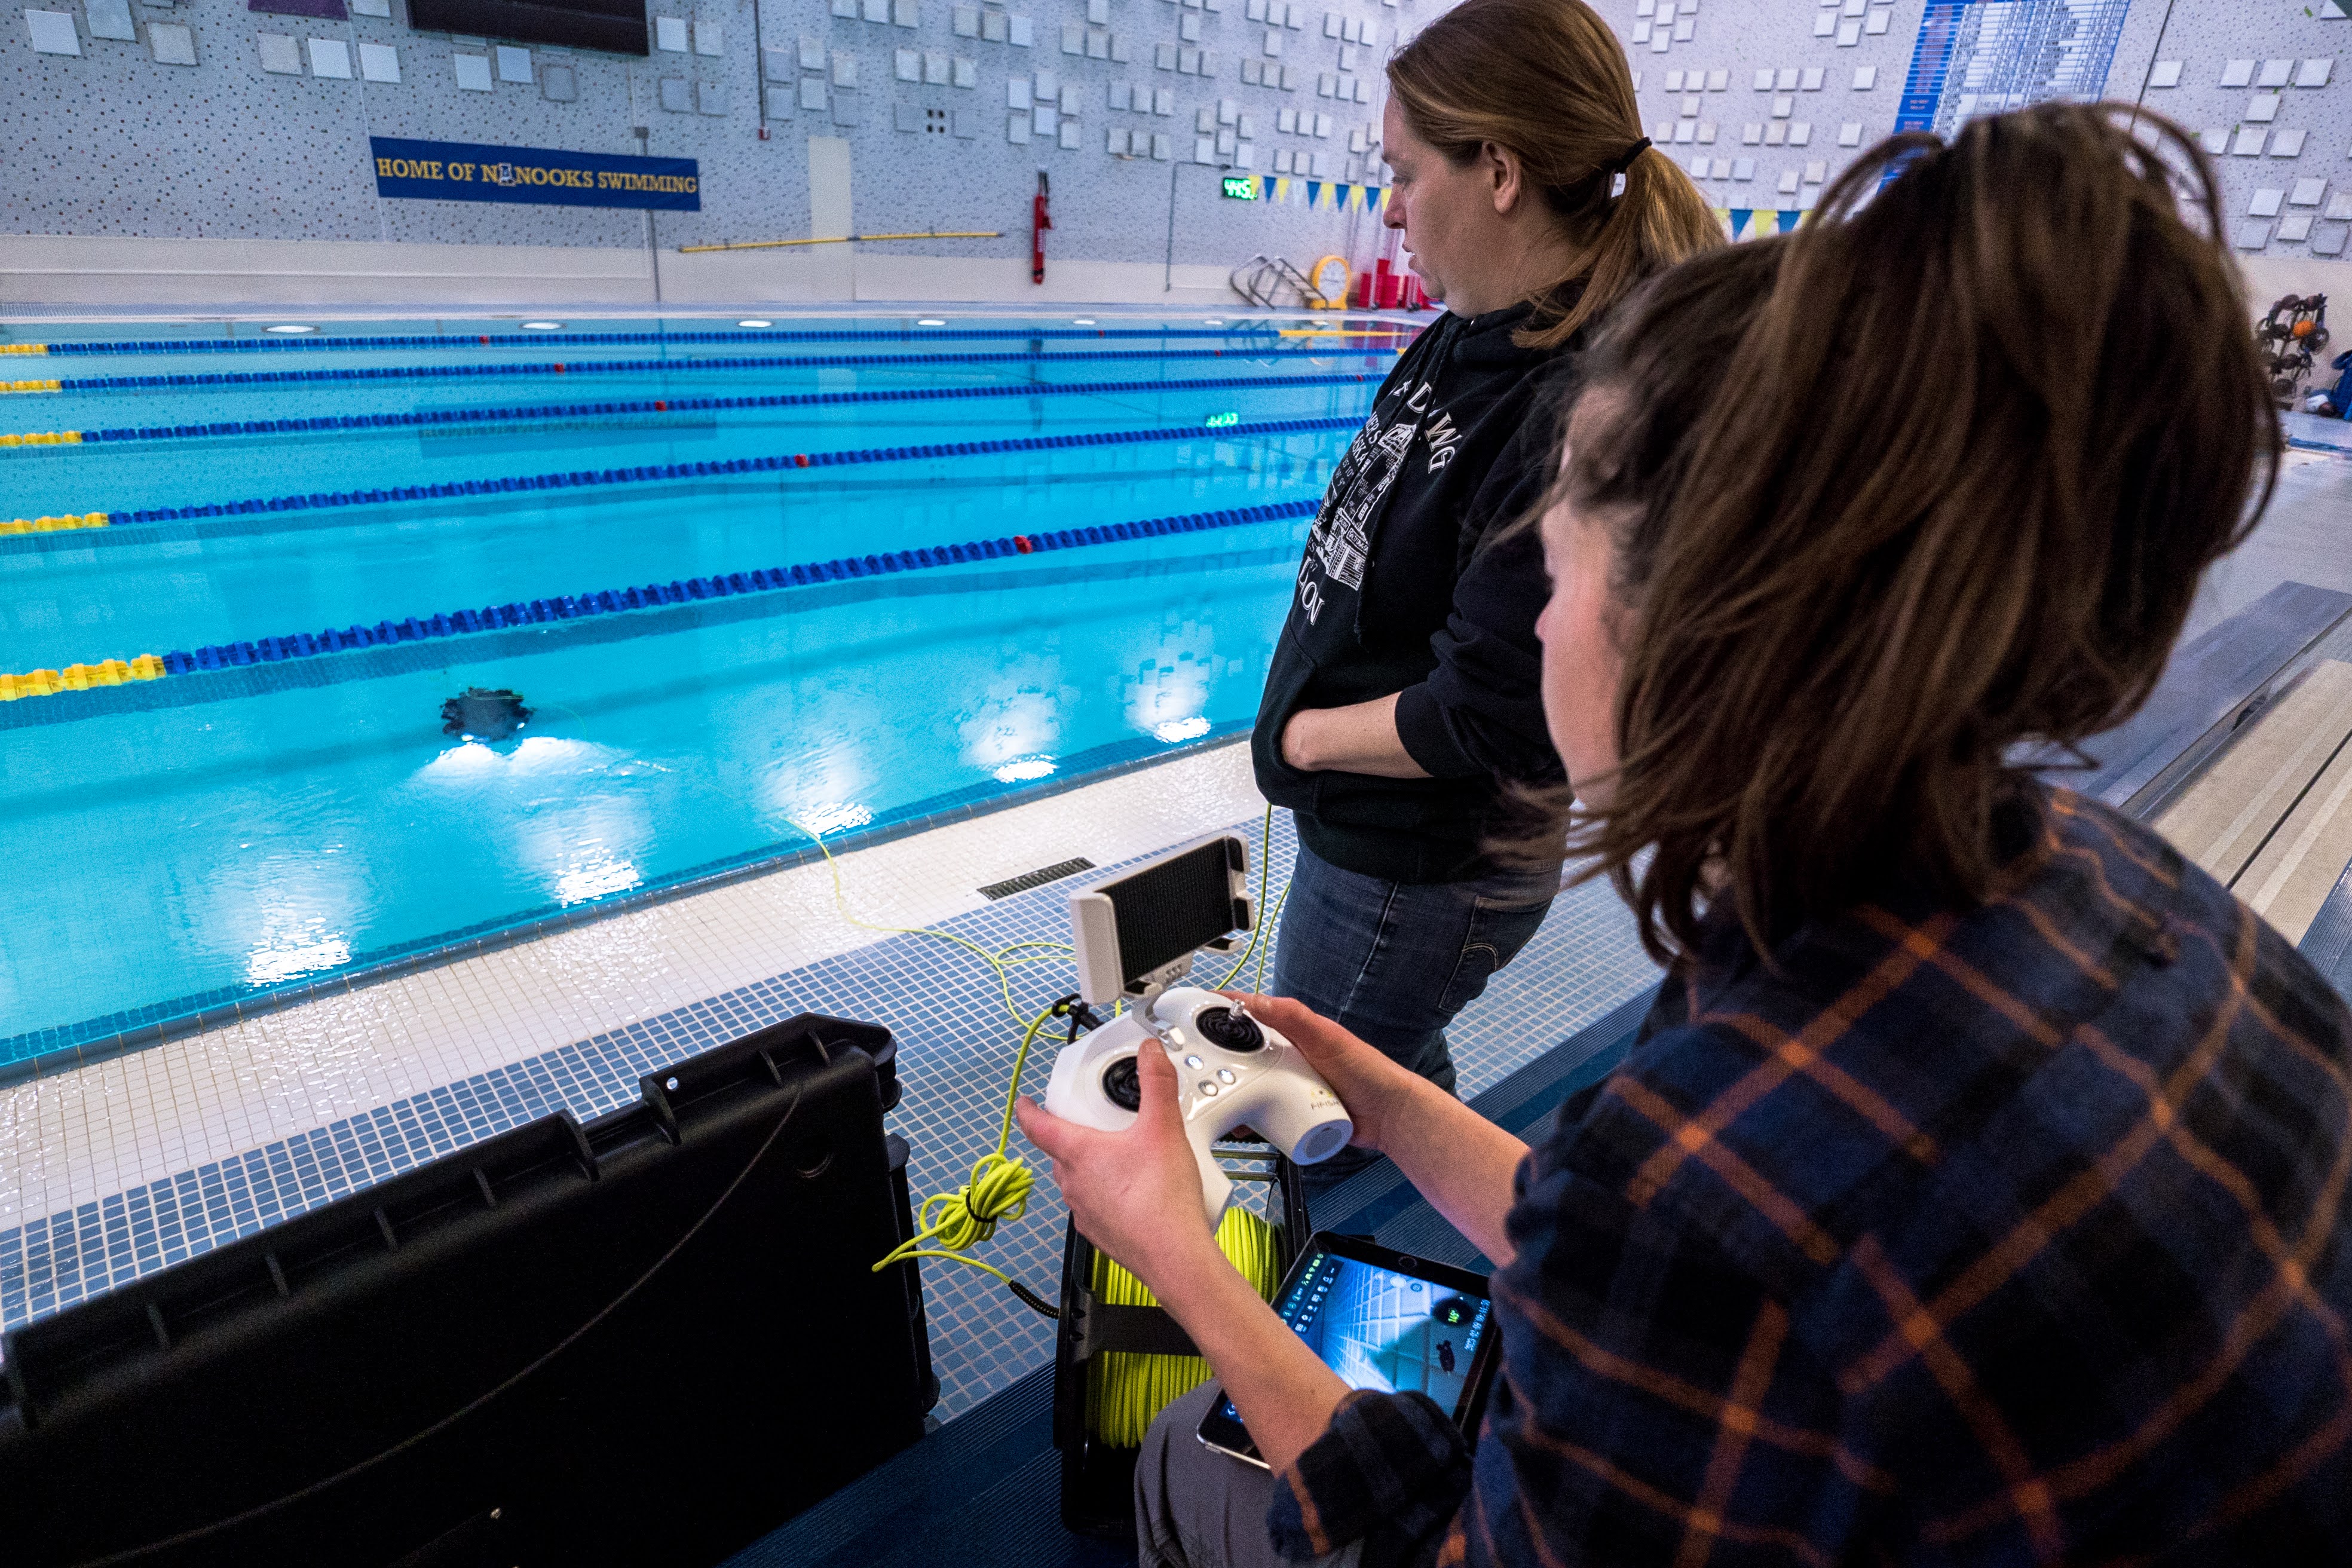 ACEP Expands Research Capabilities with New Underwater ROV Technology